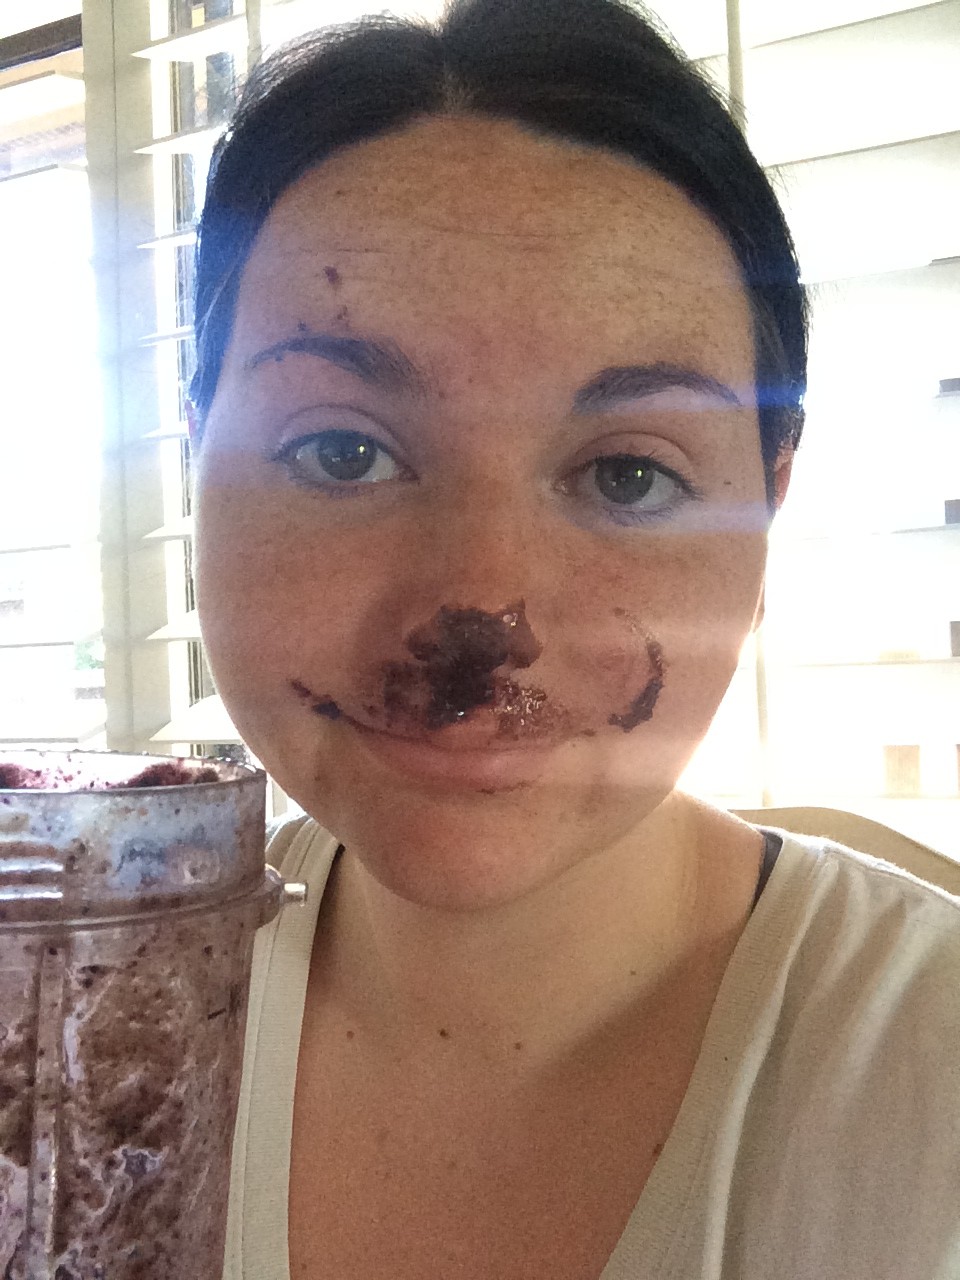 smoothie to the FACE